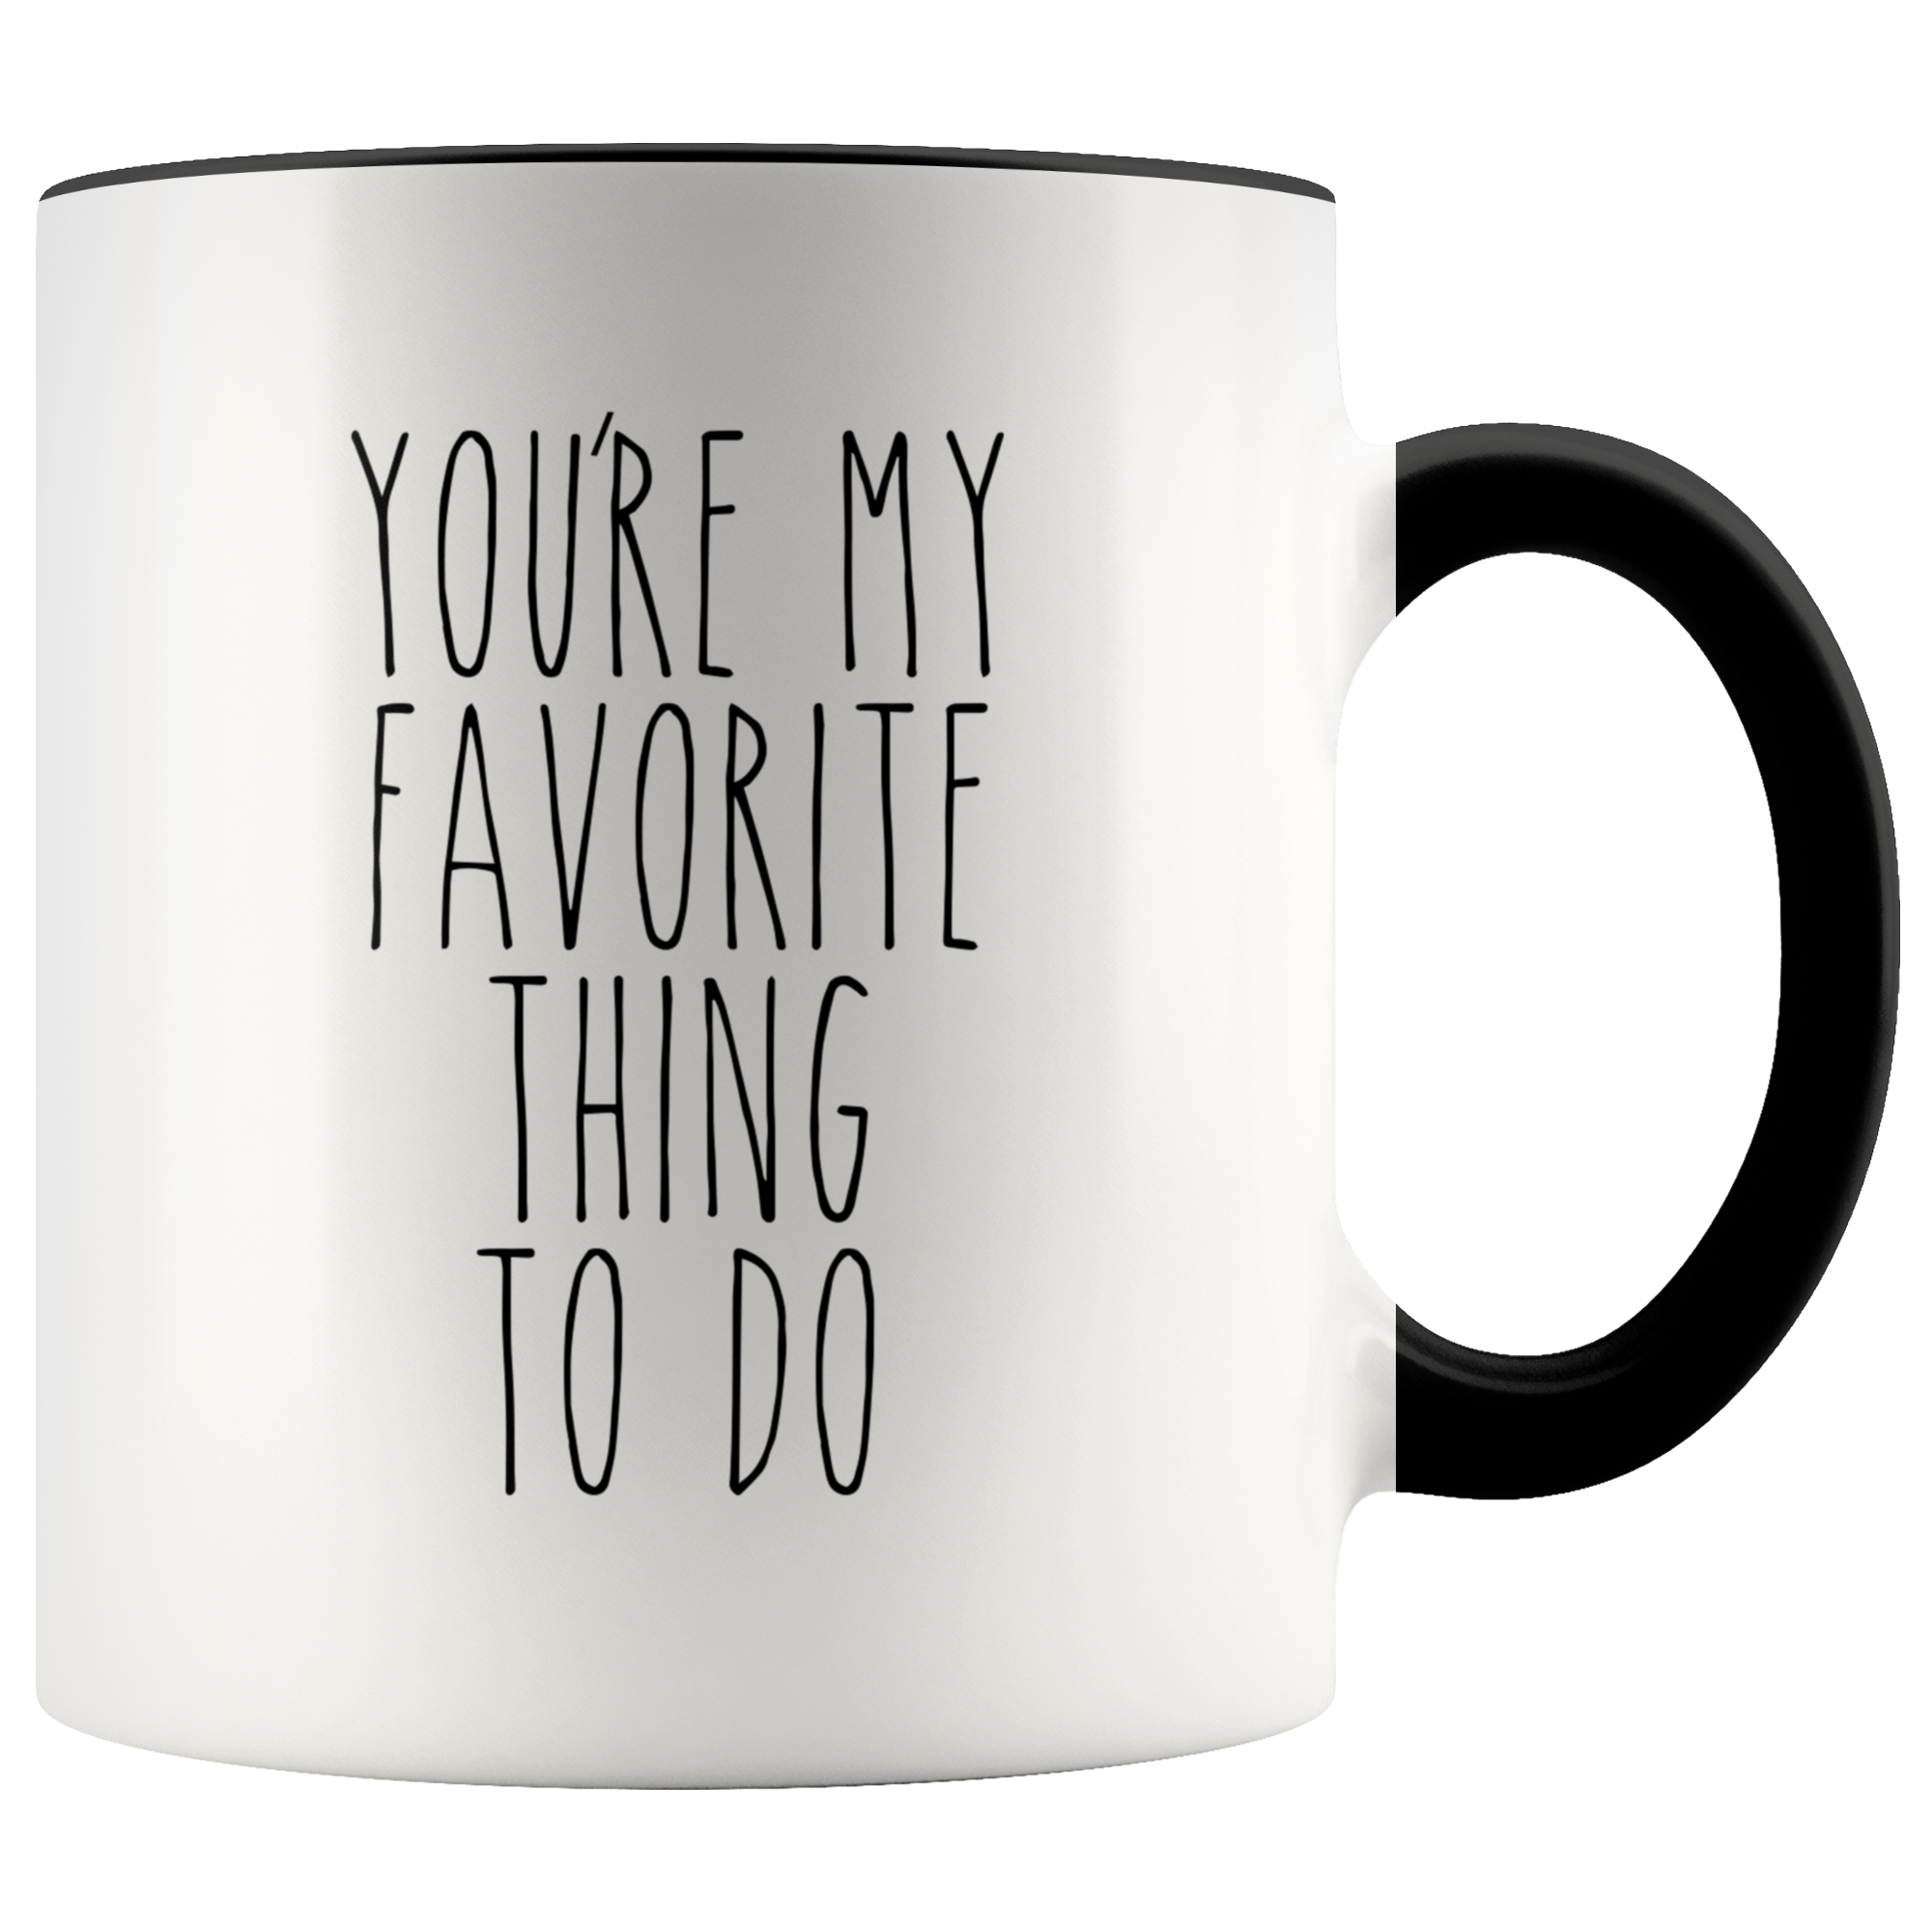 Valentines Day Gift for Him Valentine's Day Gifts for Her Boyfriend Mug Girlfriend Gift You're My Favorite Thing to Do Coffee Cup